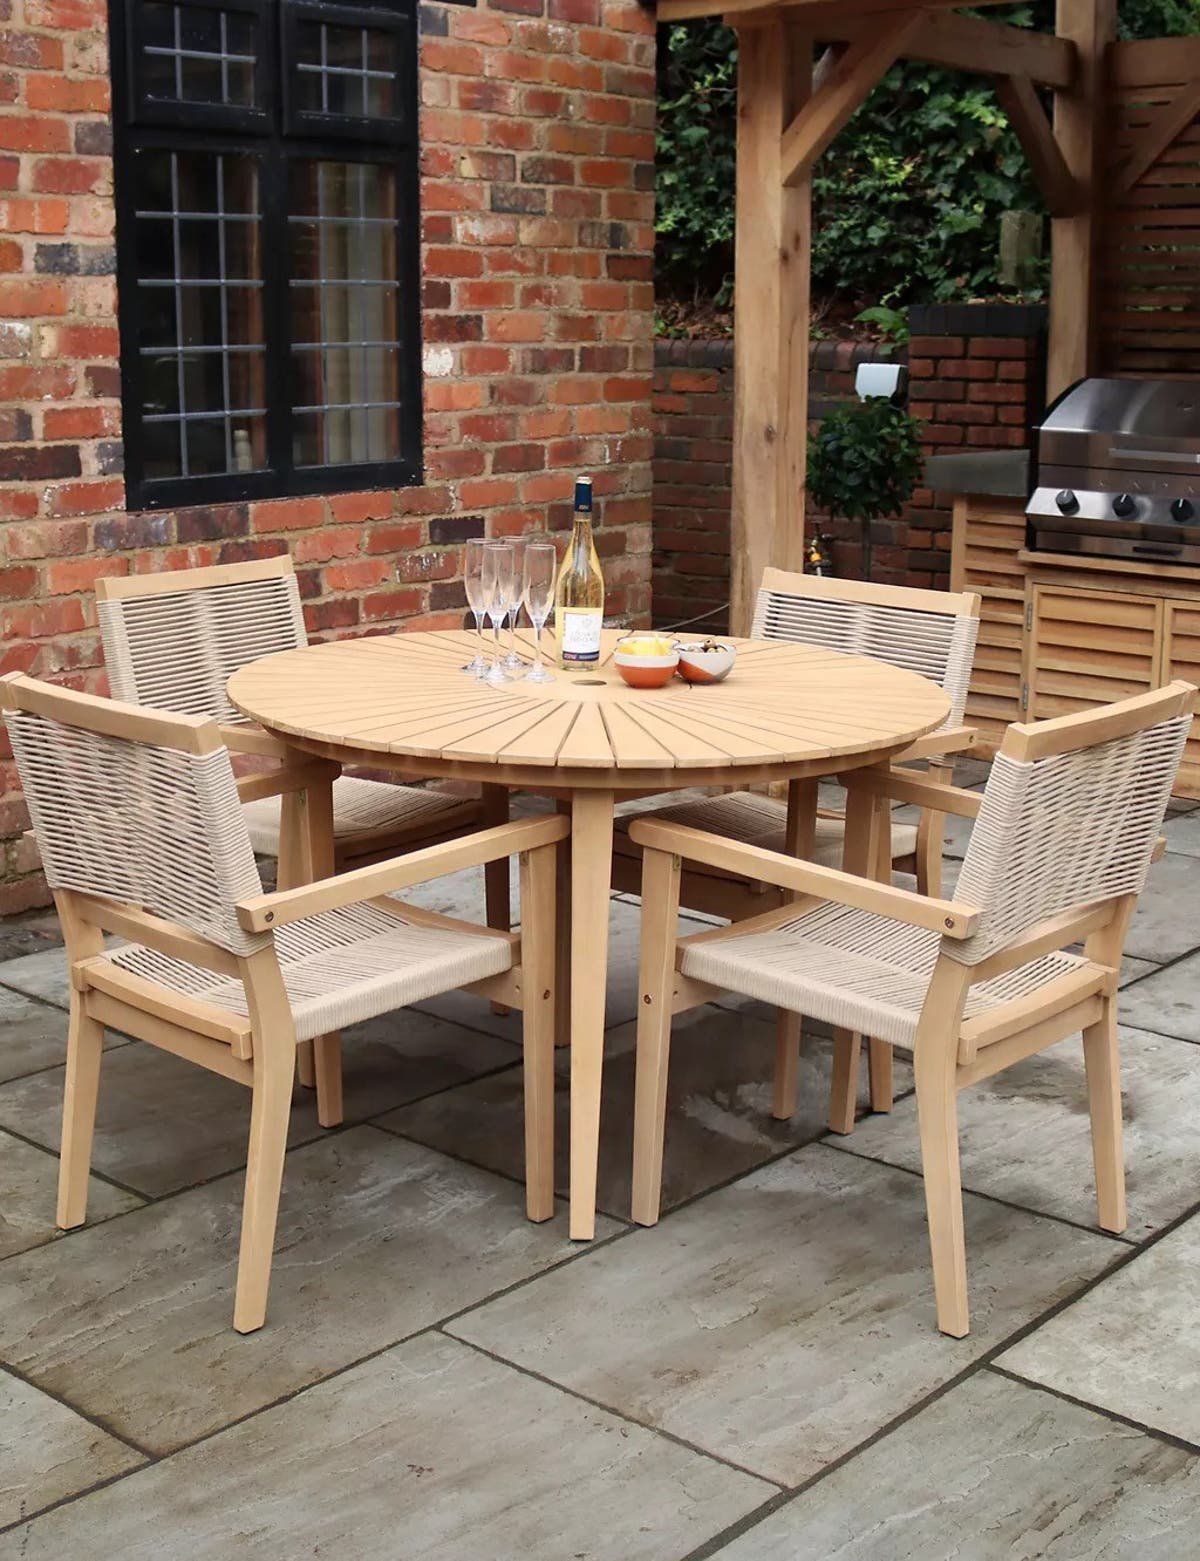 M&S tried to advertise garden furniture – they ended up bolstering rival Aldi